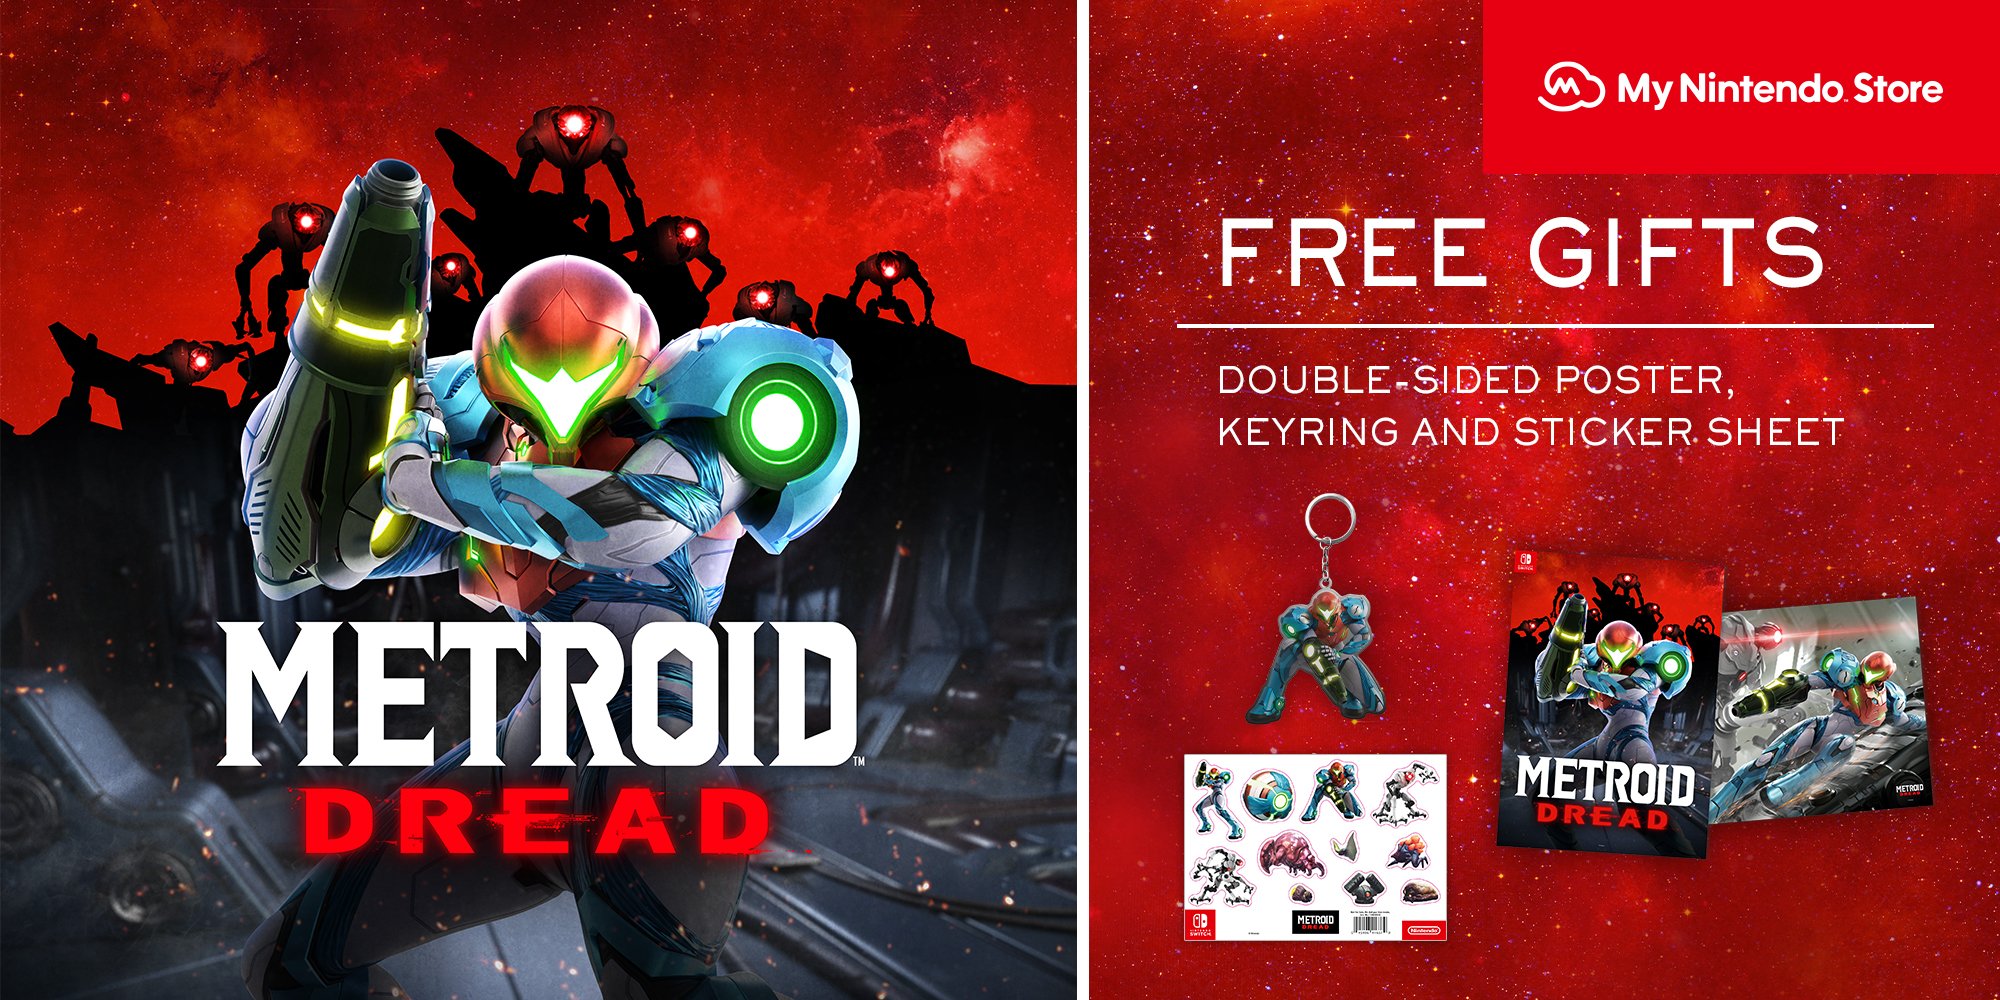 Nintendo Uk Metroid Dread The First 2d Metroid Game In Almost 19 Years Arrives On Nintendo Switch On 8th October Pre Order On My Nintendo Store To Receive A Free Keyring